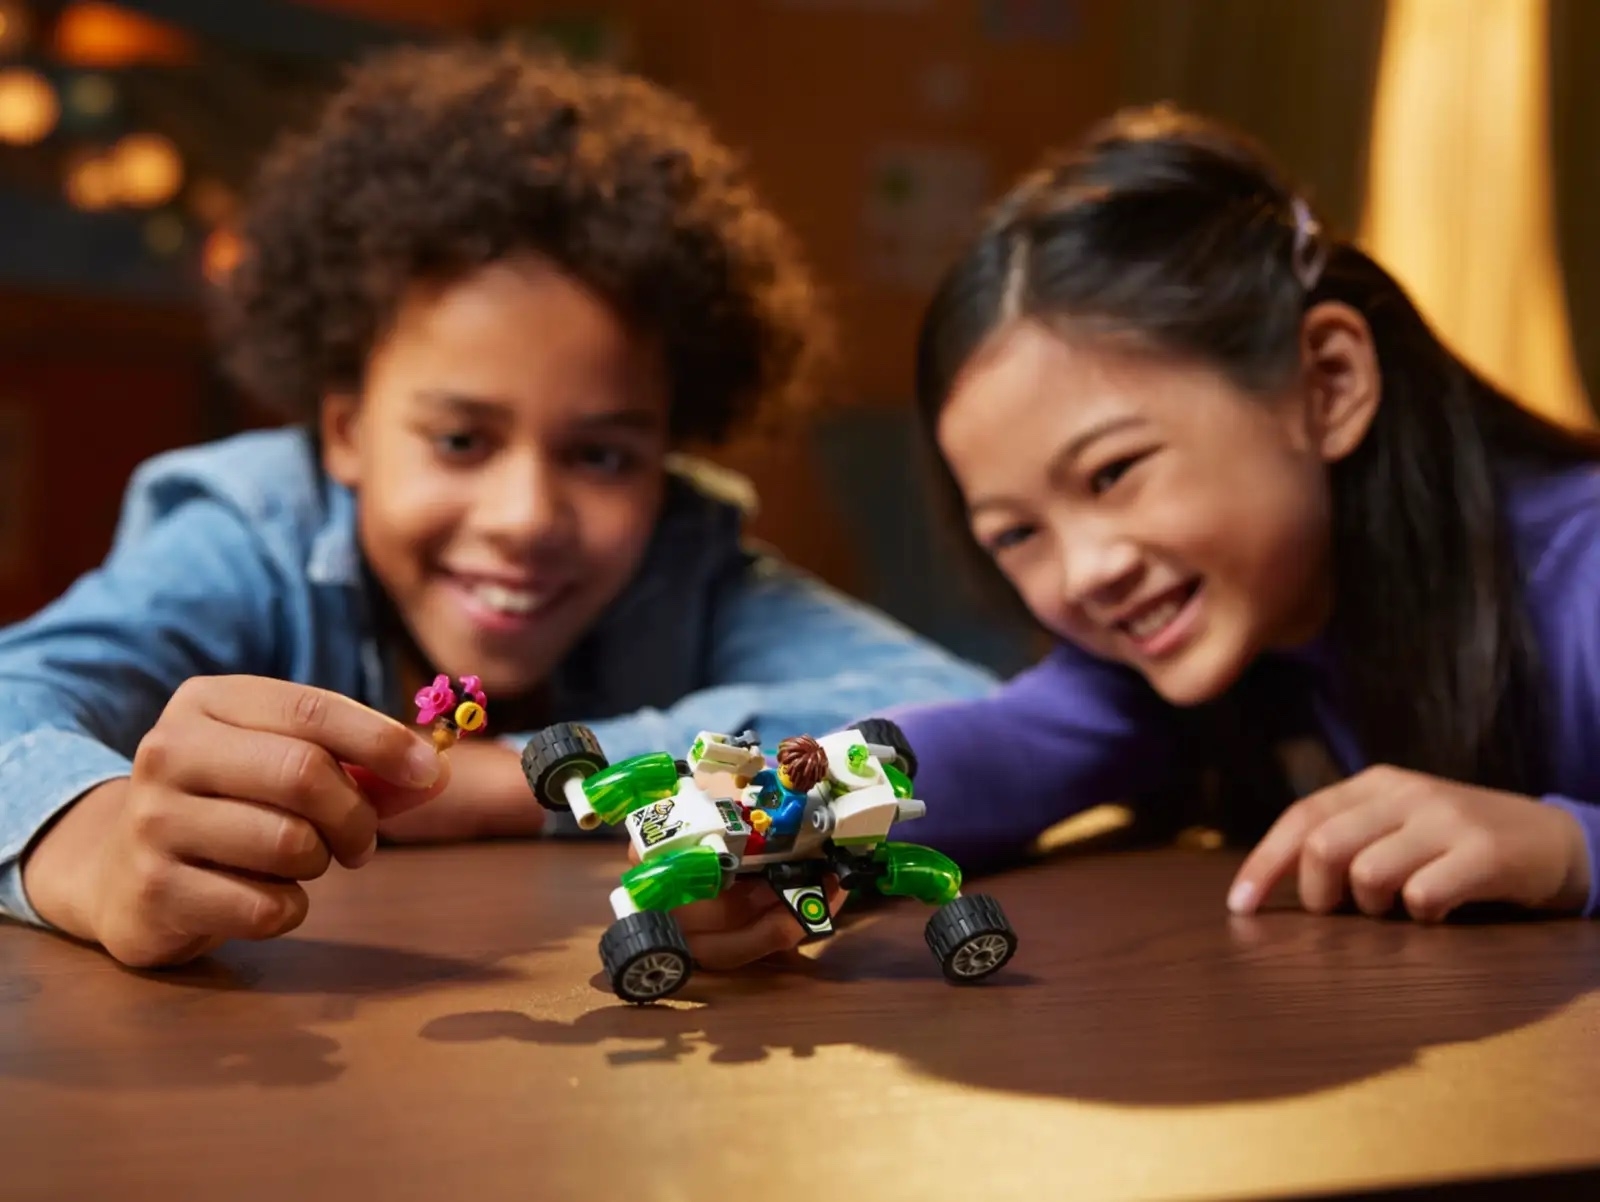 Two kids play with a LEGO vehicle